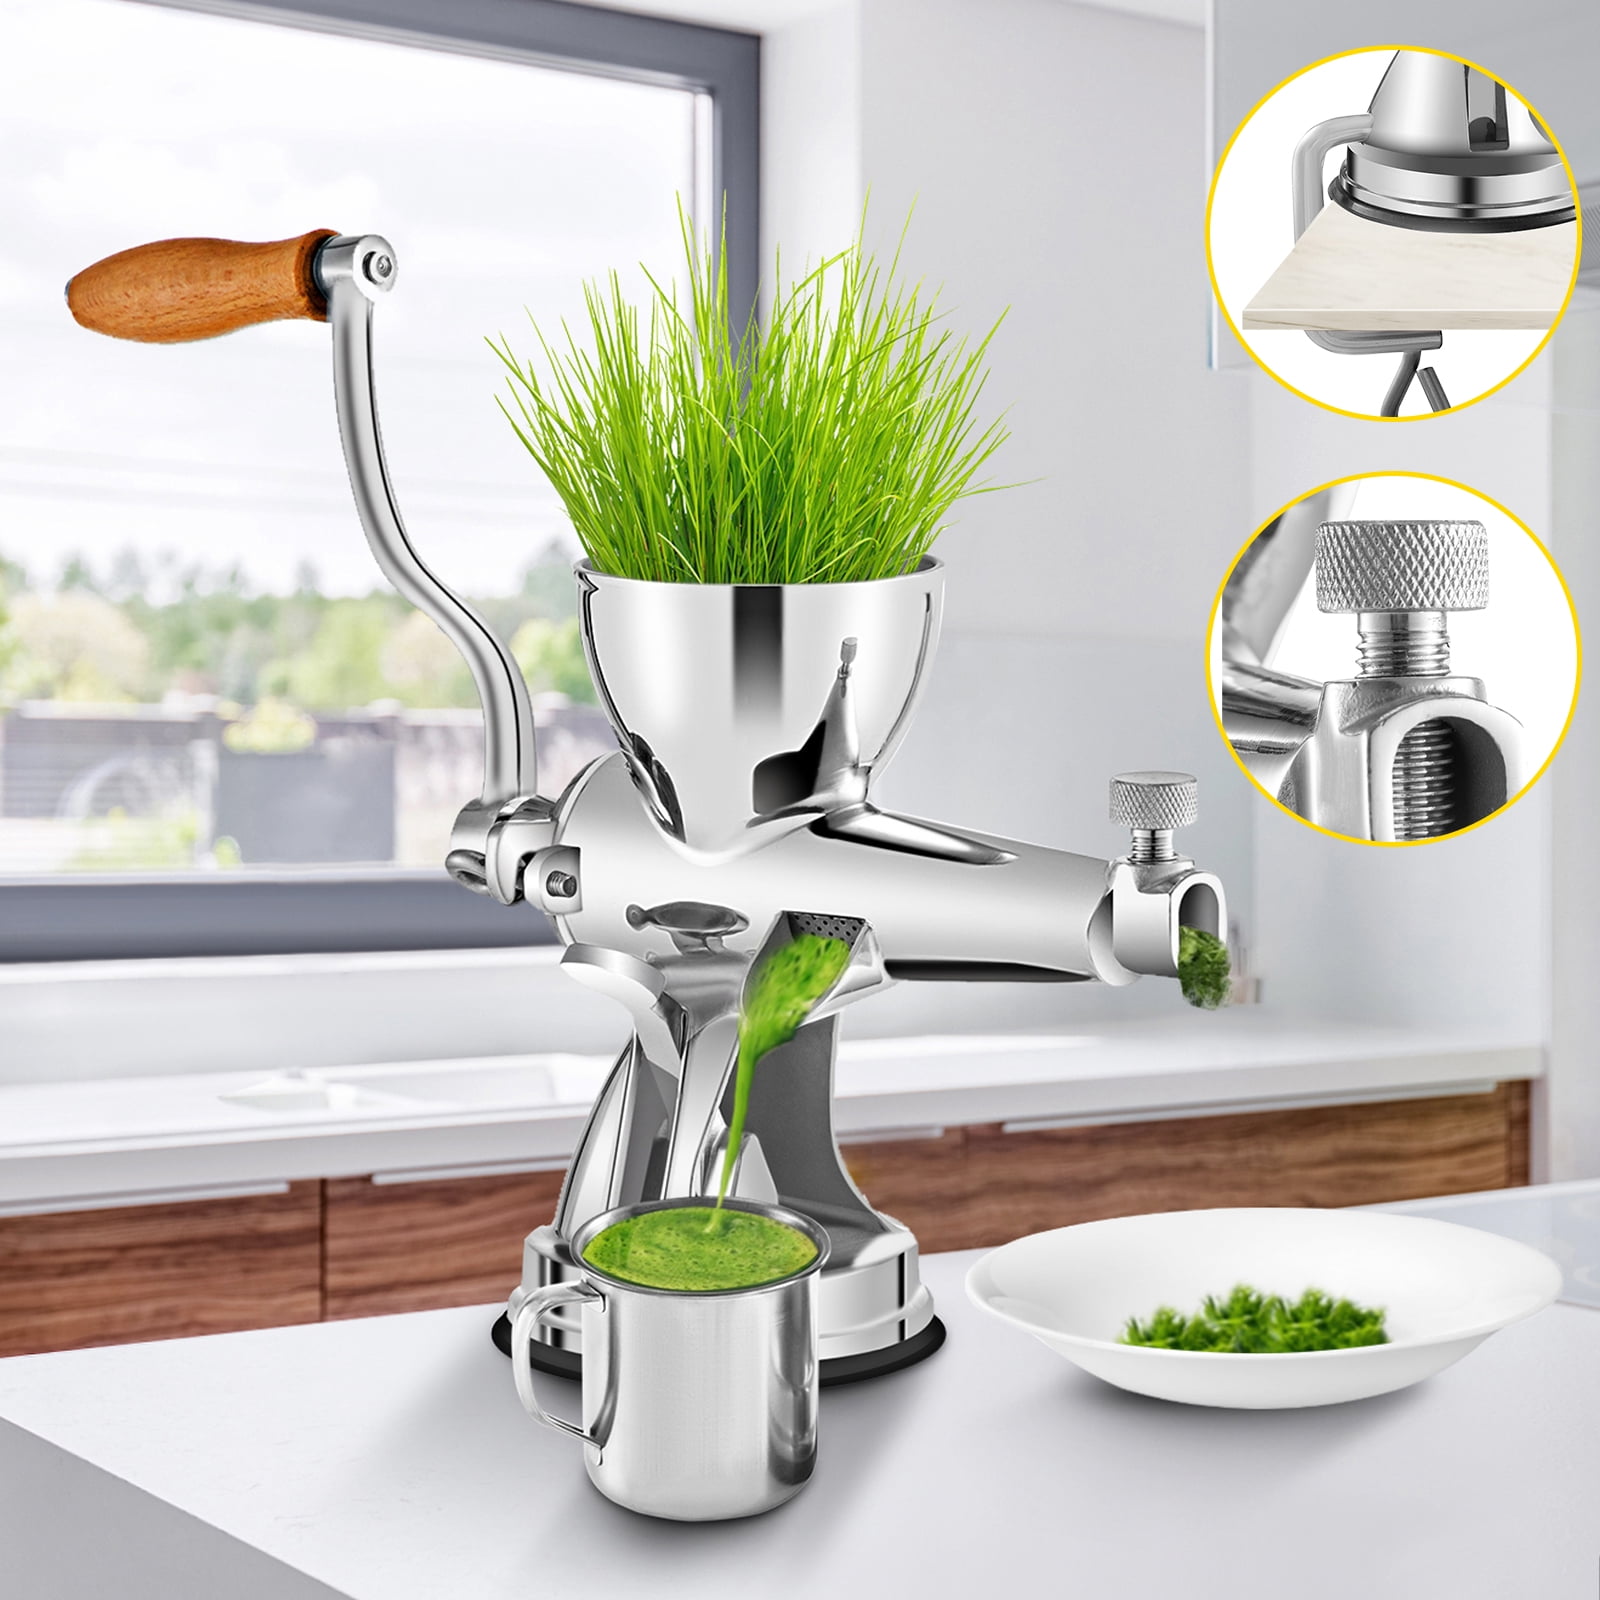 Juice extractor manual wheat Grass Fruit vegetables carrot silvery red 